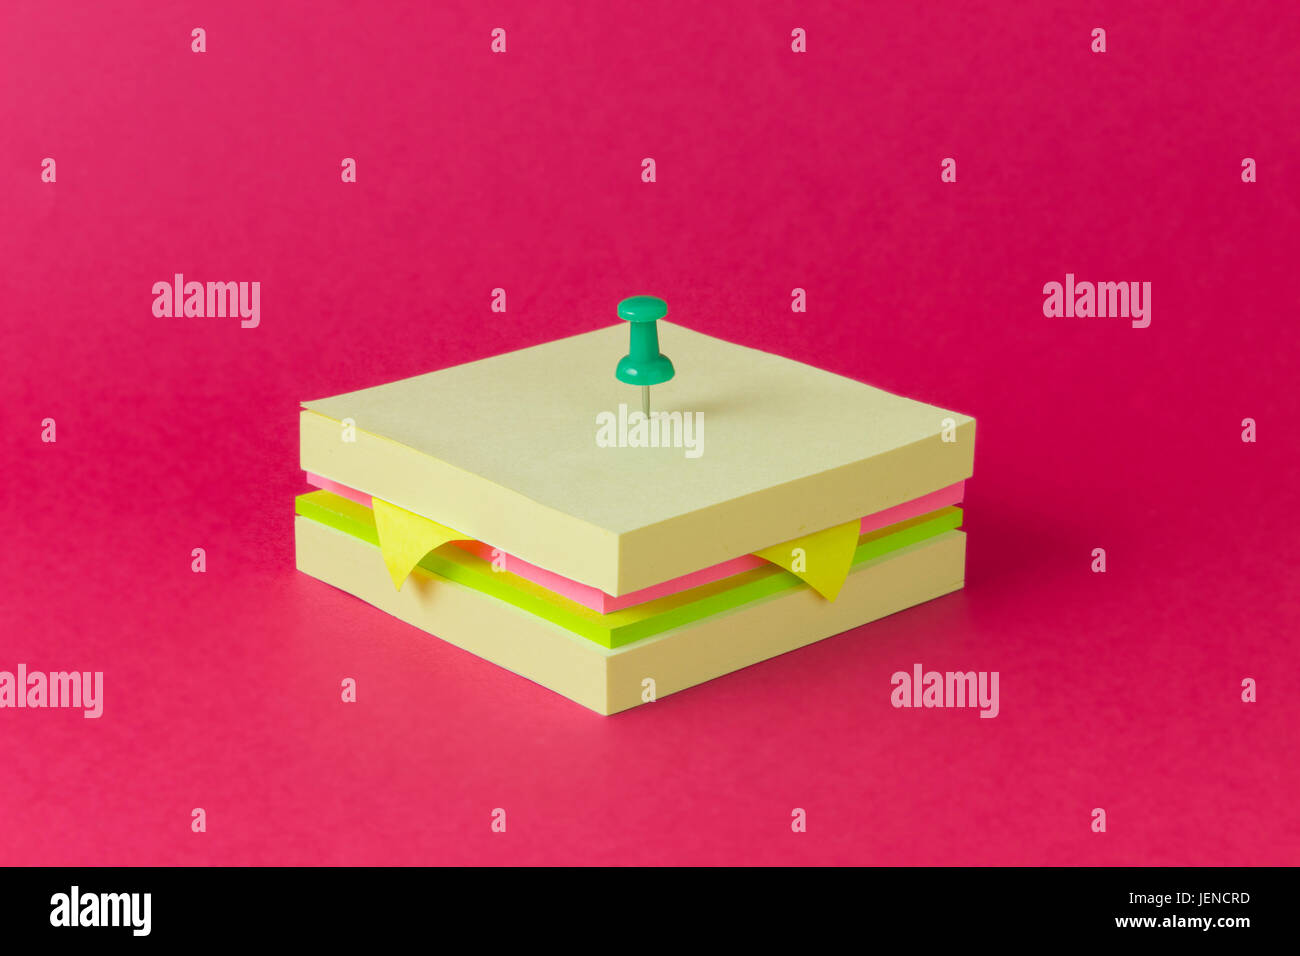 Conceptual sandwich made from sticky notes Stock Photo